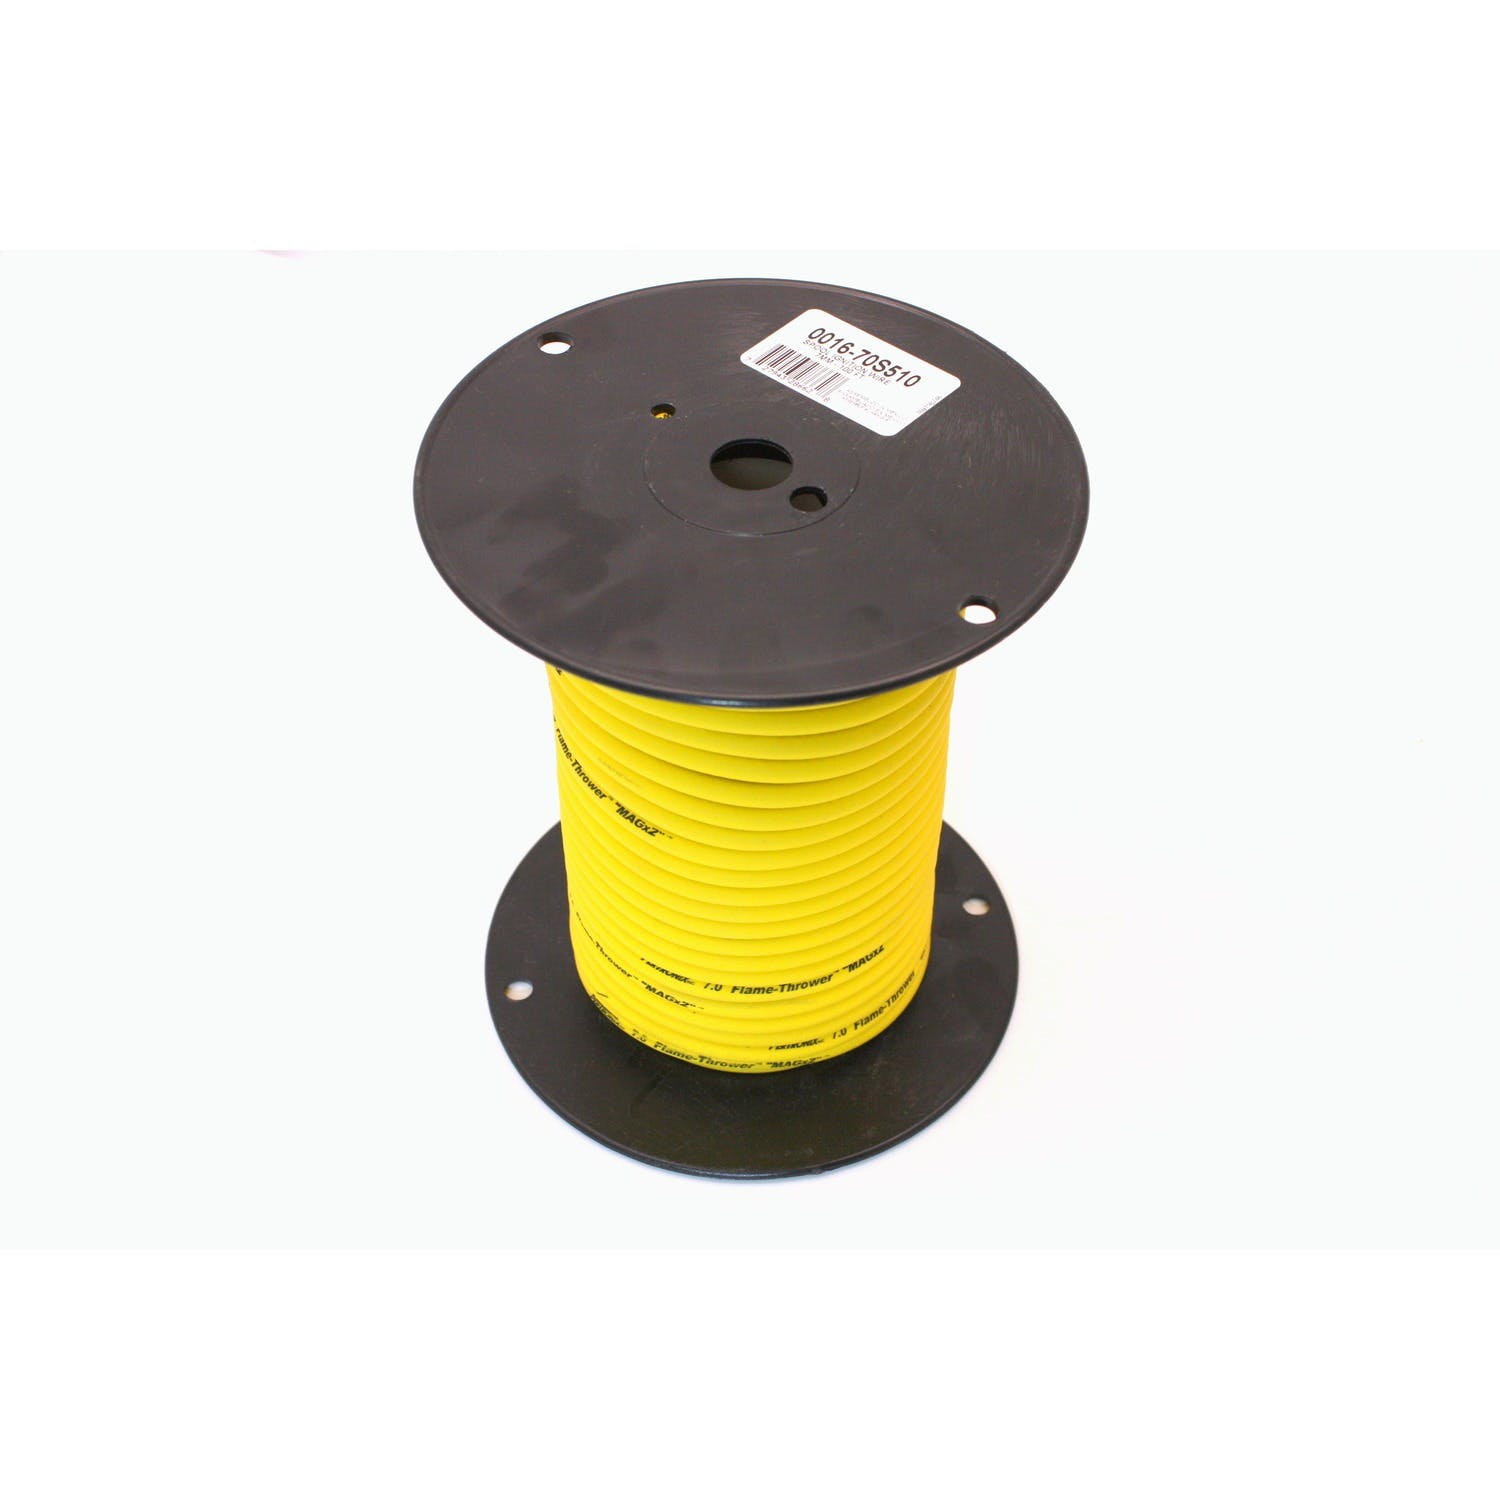 PerTronix 70S510 Wires, 7mm Yellow - 100ft spool